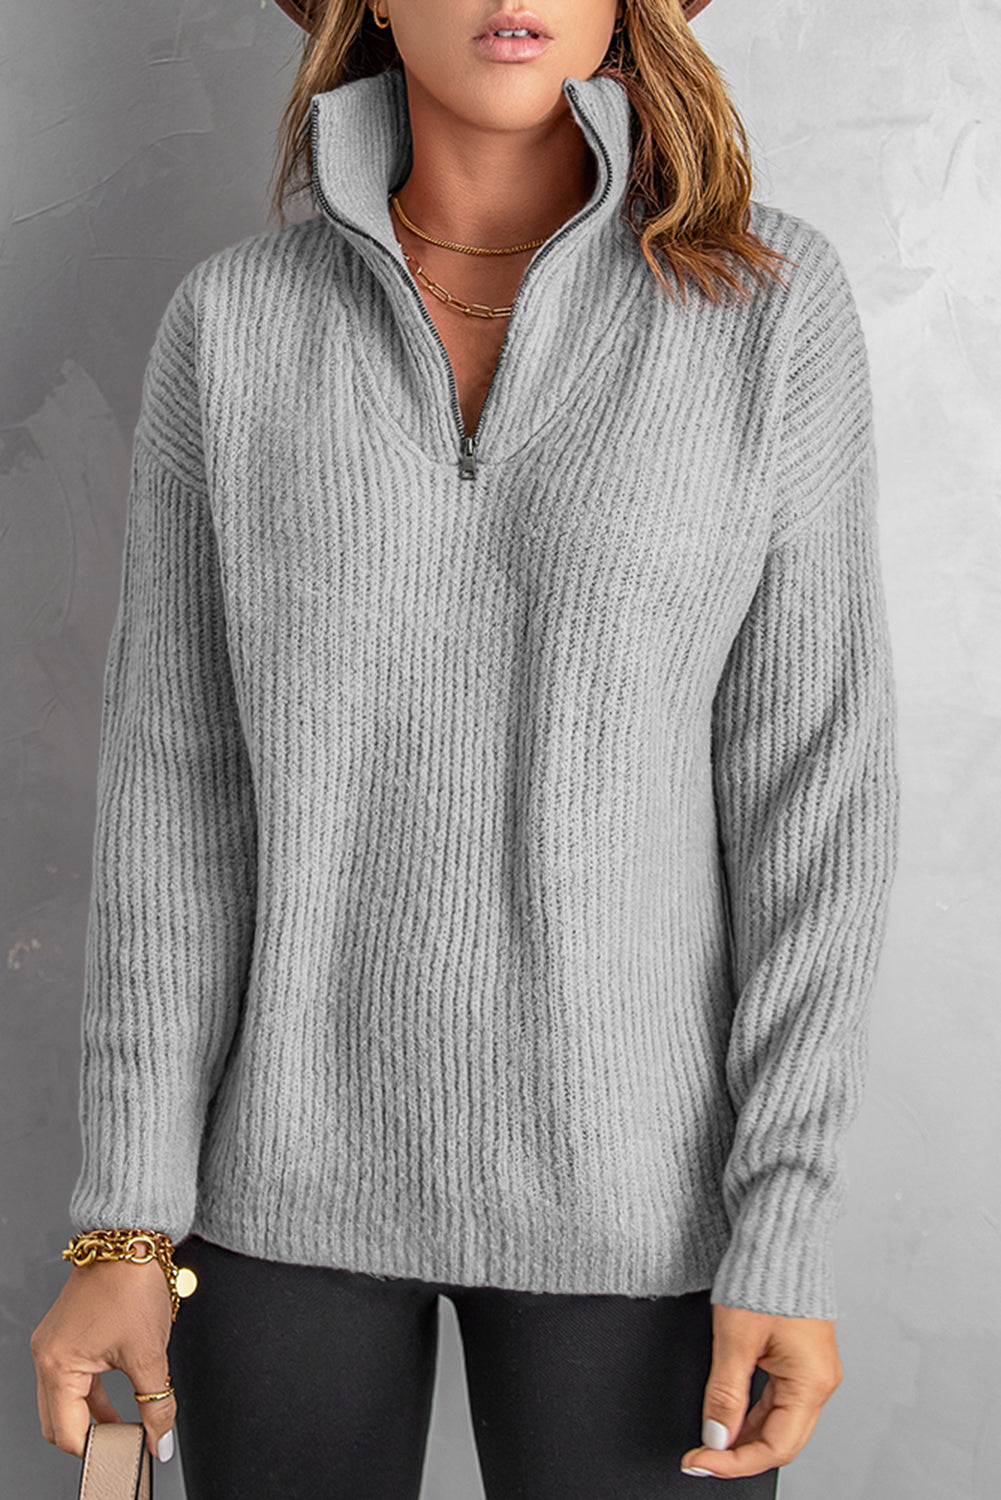 Pull Gris Femme Tricote Col Zippe